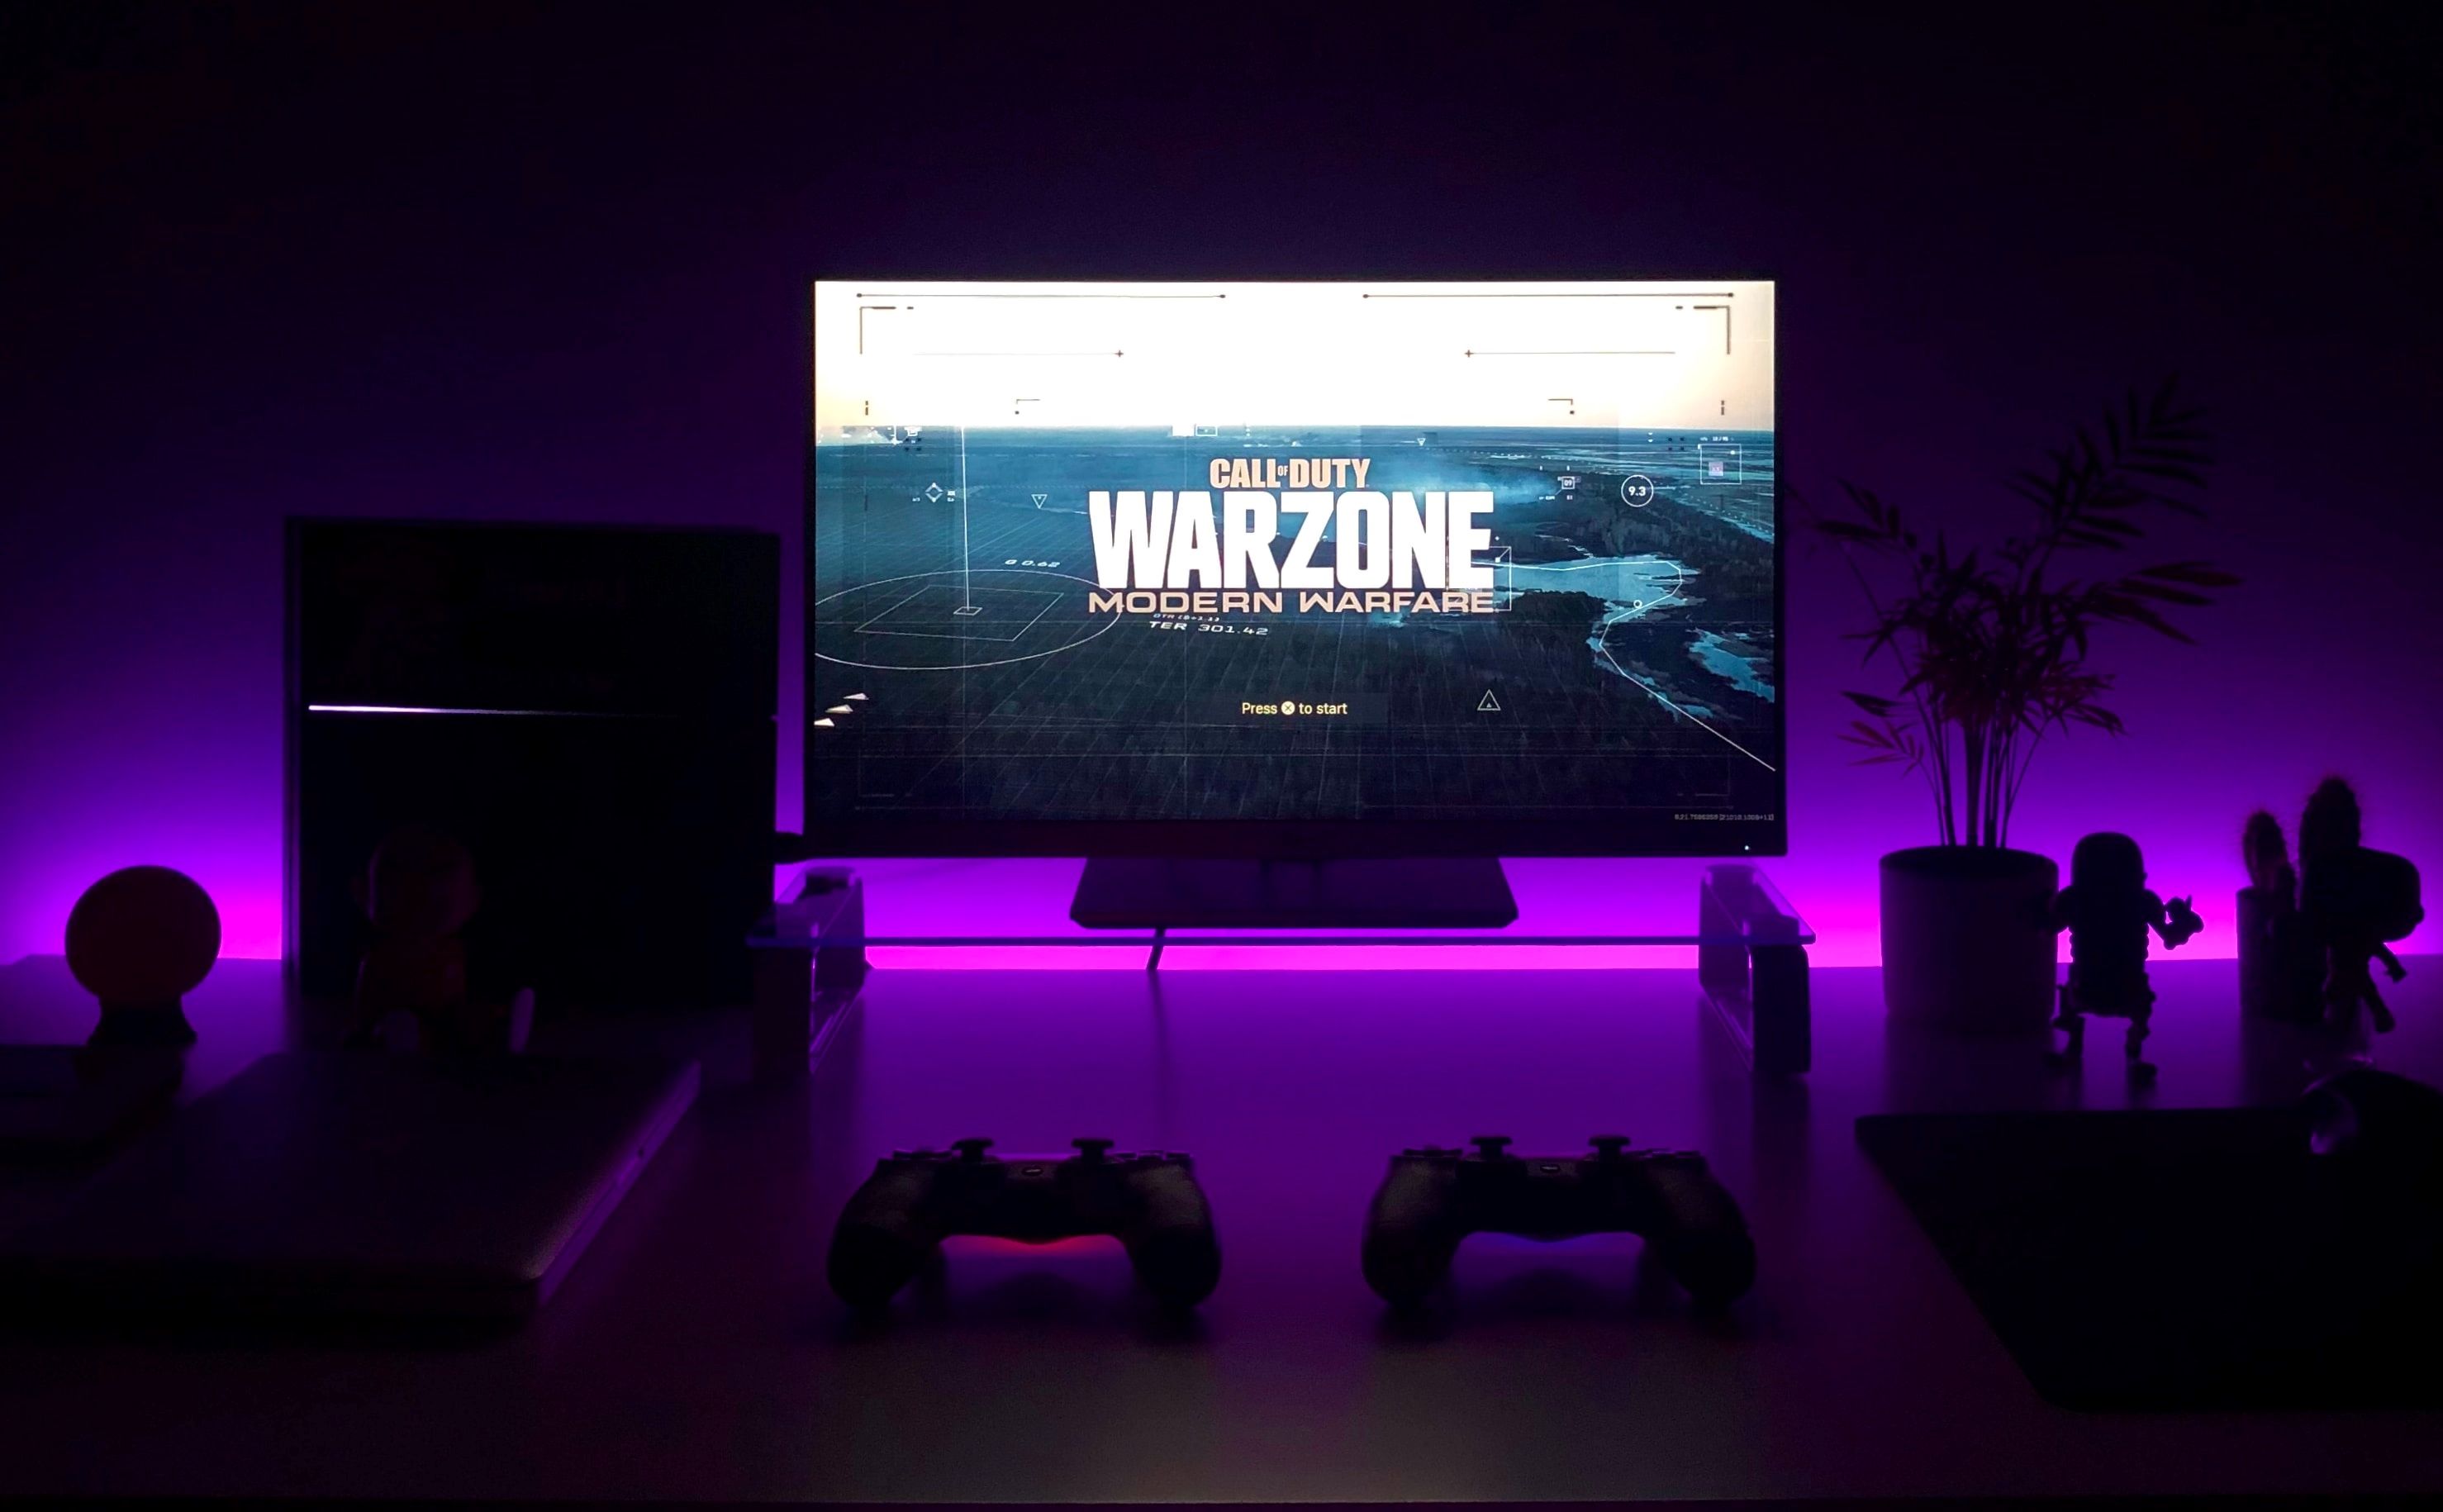 Warzone being played on a PC